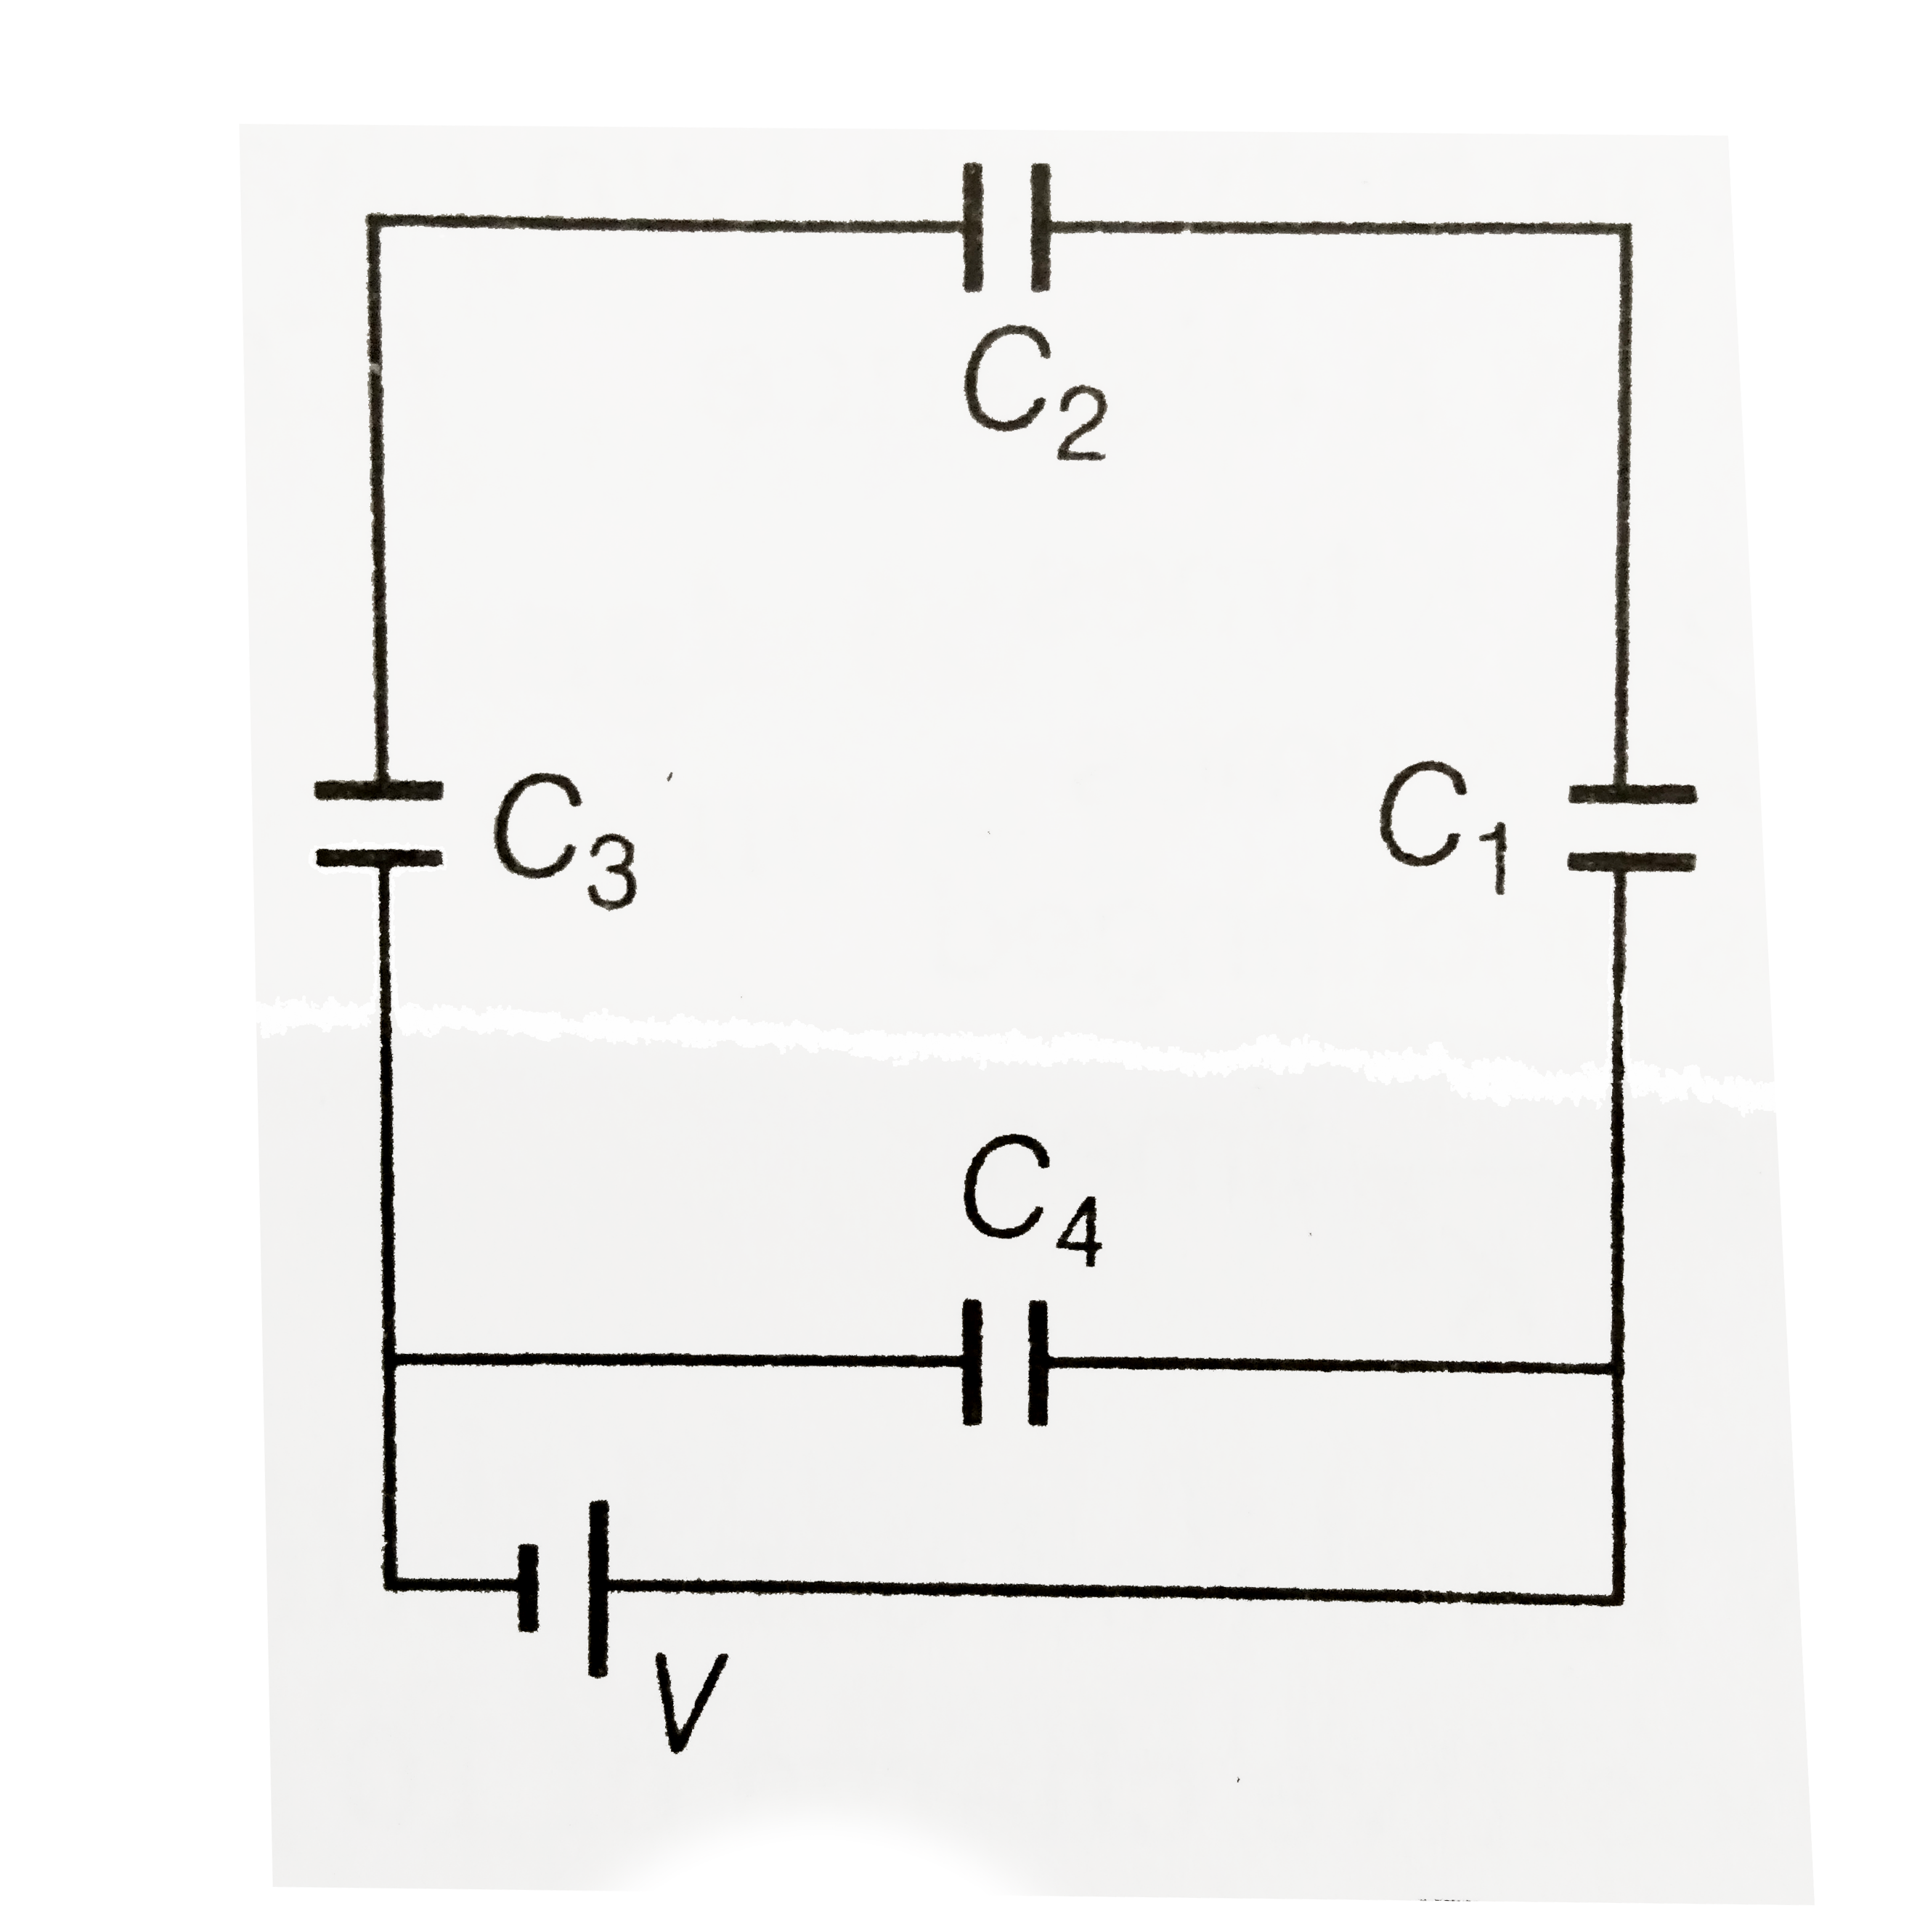 A network of four capacitors of capacity equal to C(1) = C, C(2) = 2C, C(3) = 3C and C(4) = 4C are connected to a battery as charges on C(2) and C(4) is